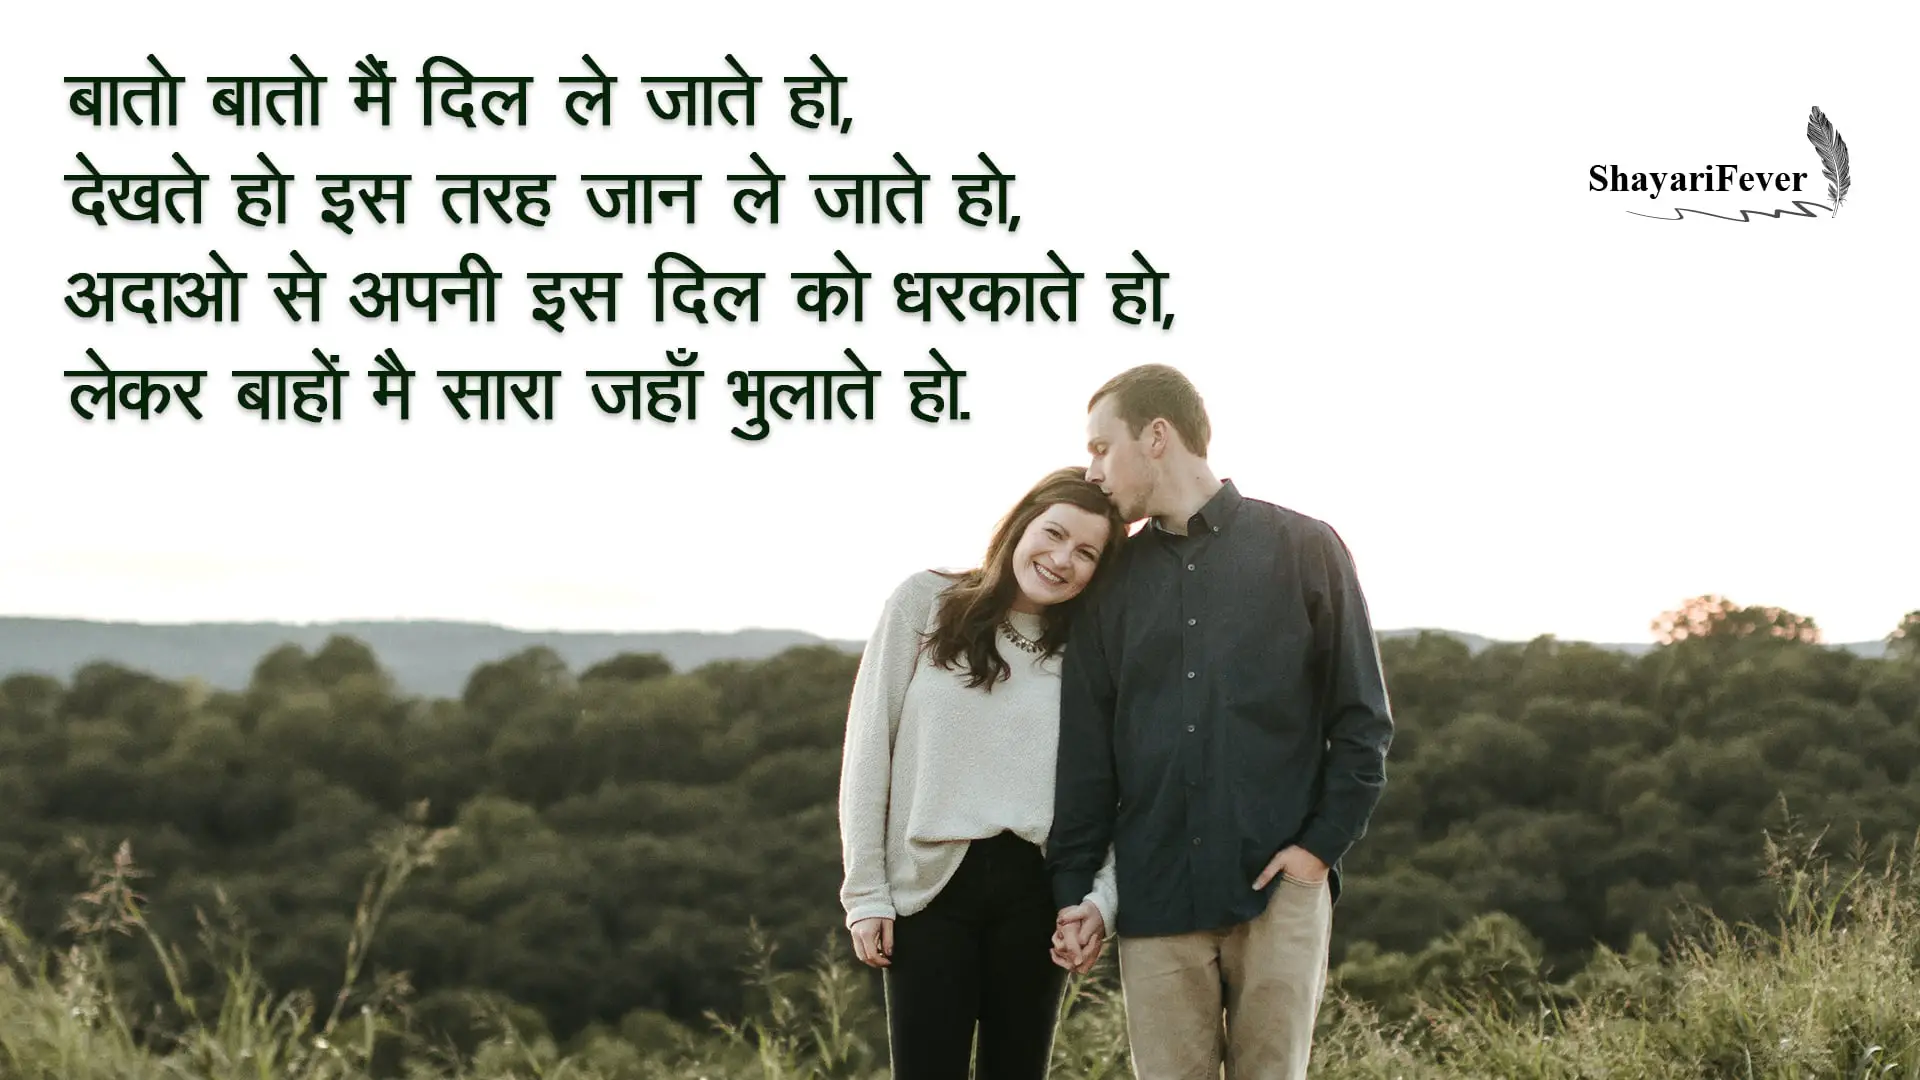 Hug Day Quotes In Hindi